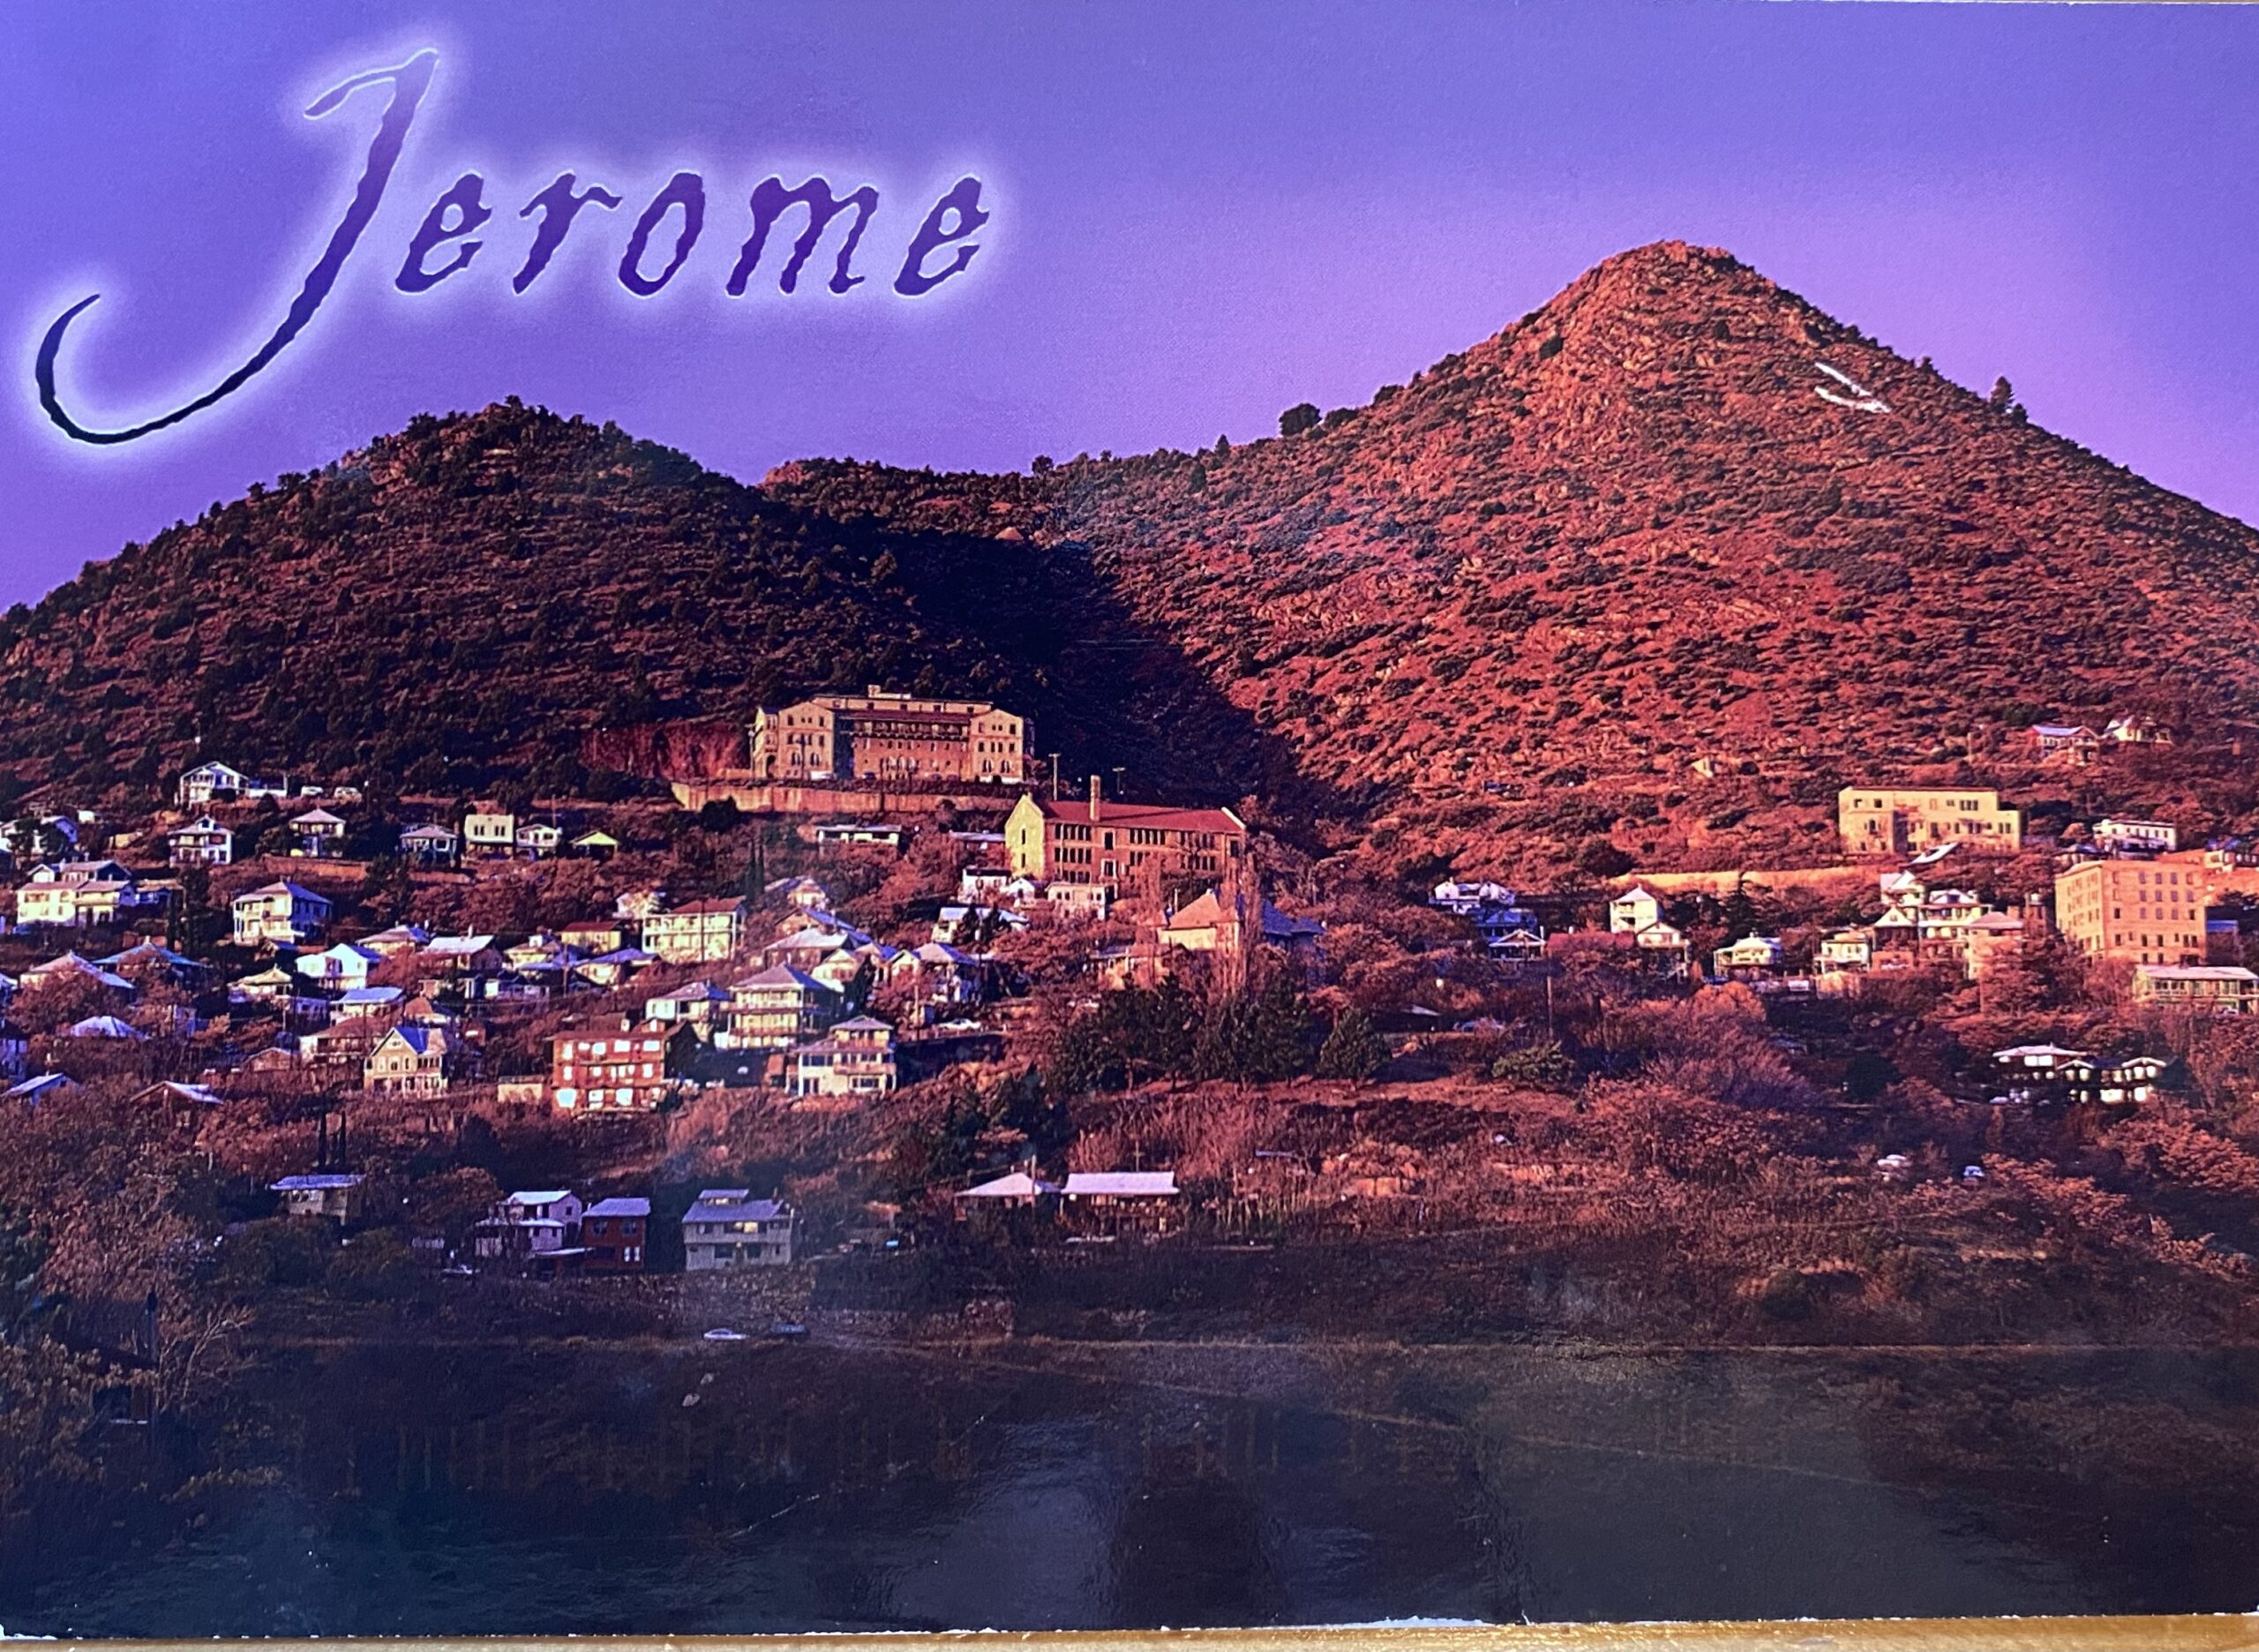 Postcard from Arizona, received August 6 2022